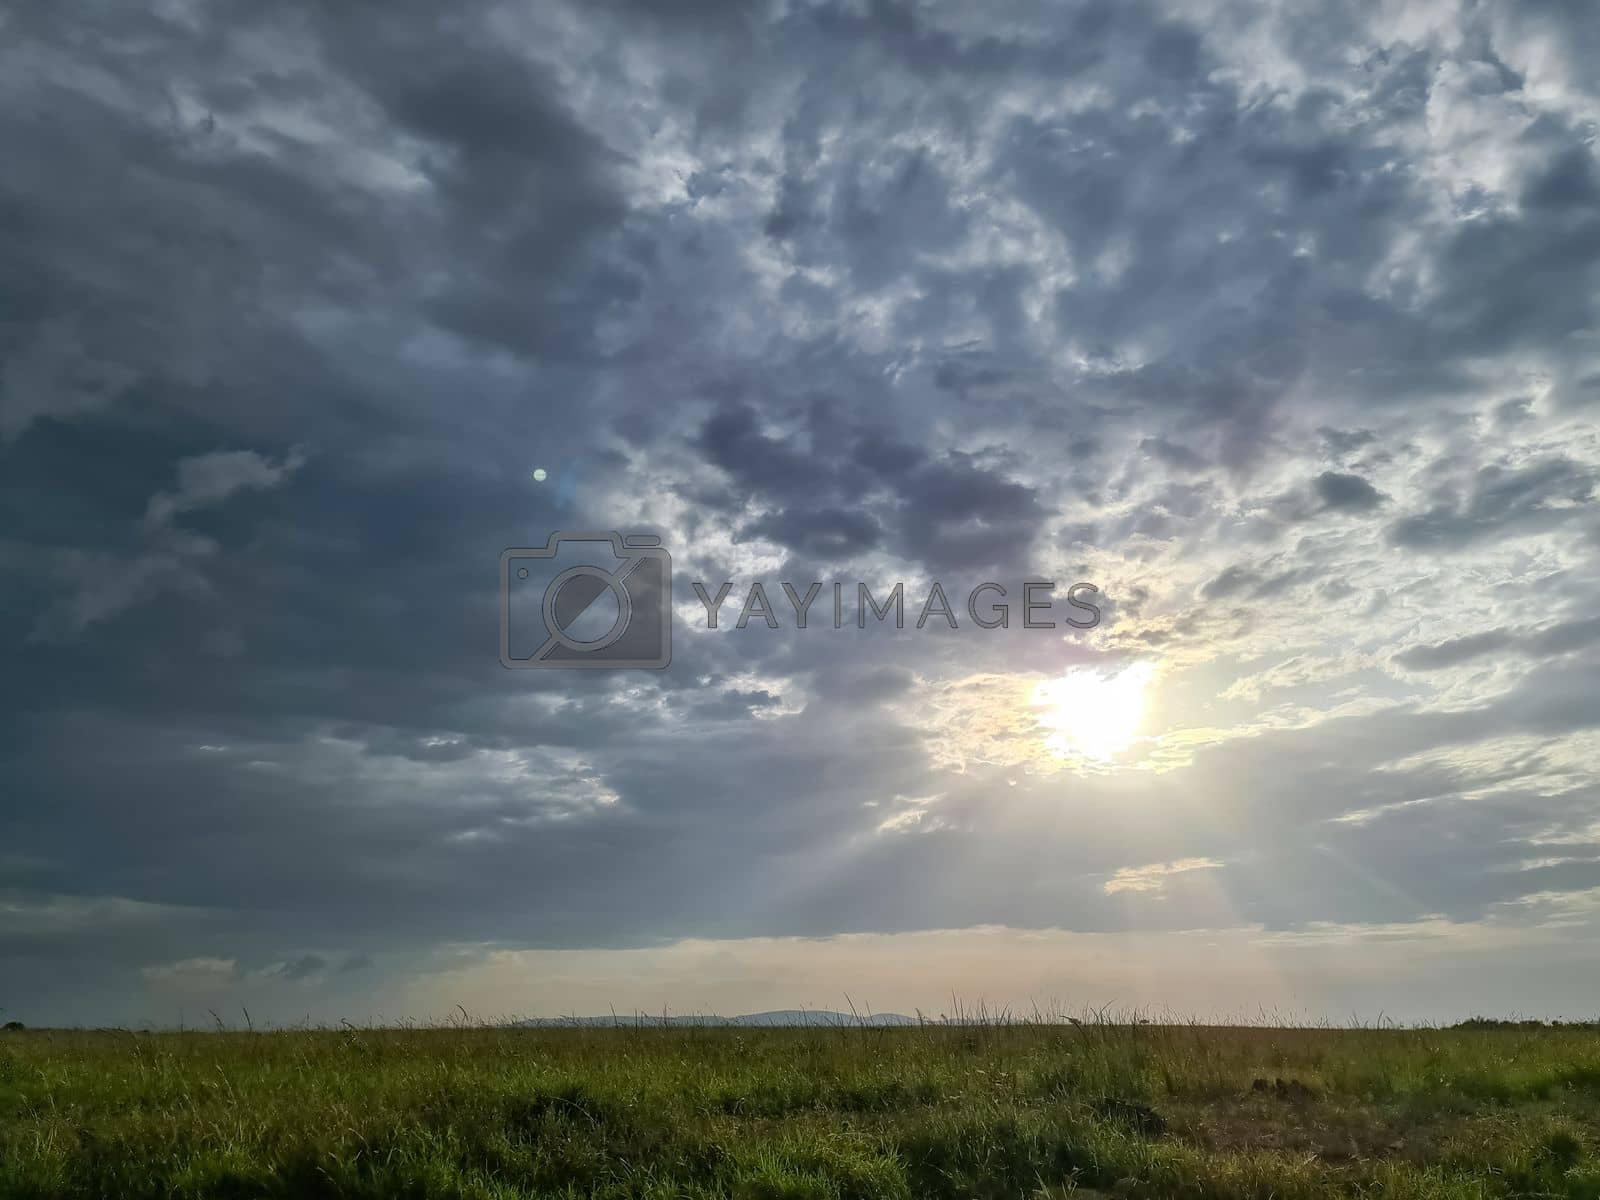 Royalty free image of Beautiful view at sunbeams with some lens flares and clouds in a blue sky by MP_foto71